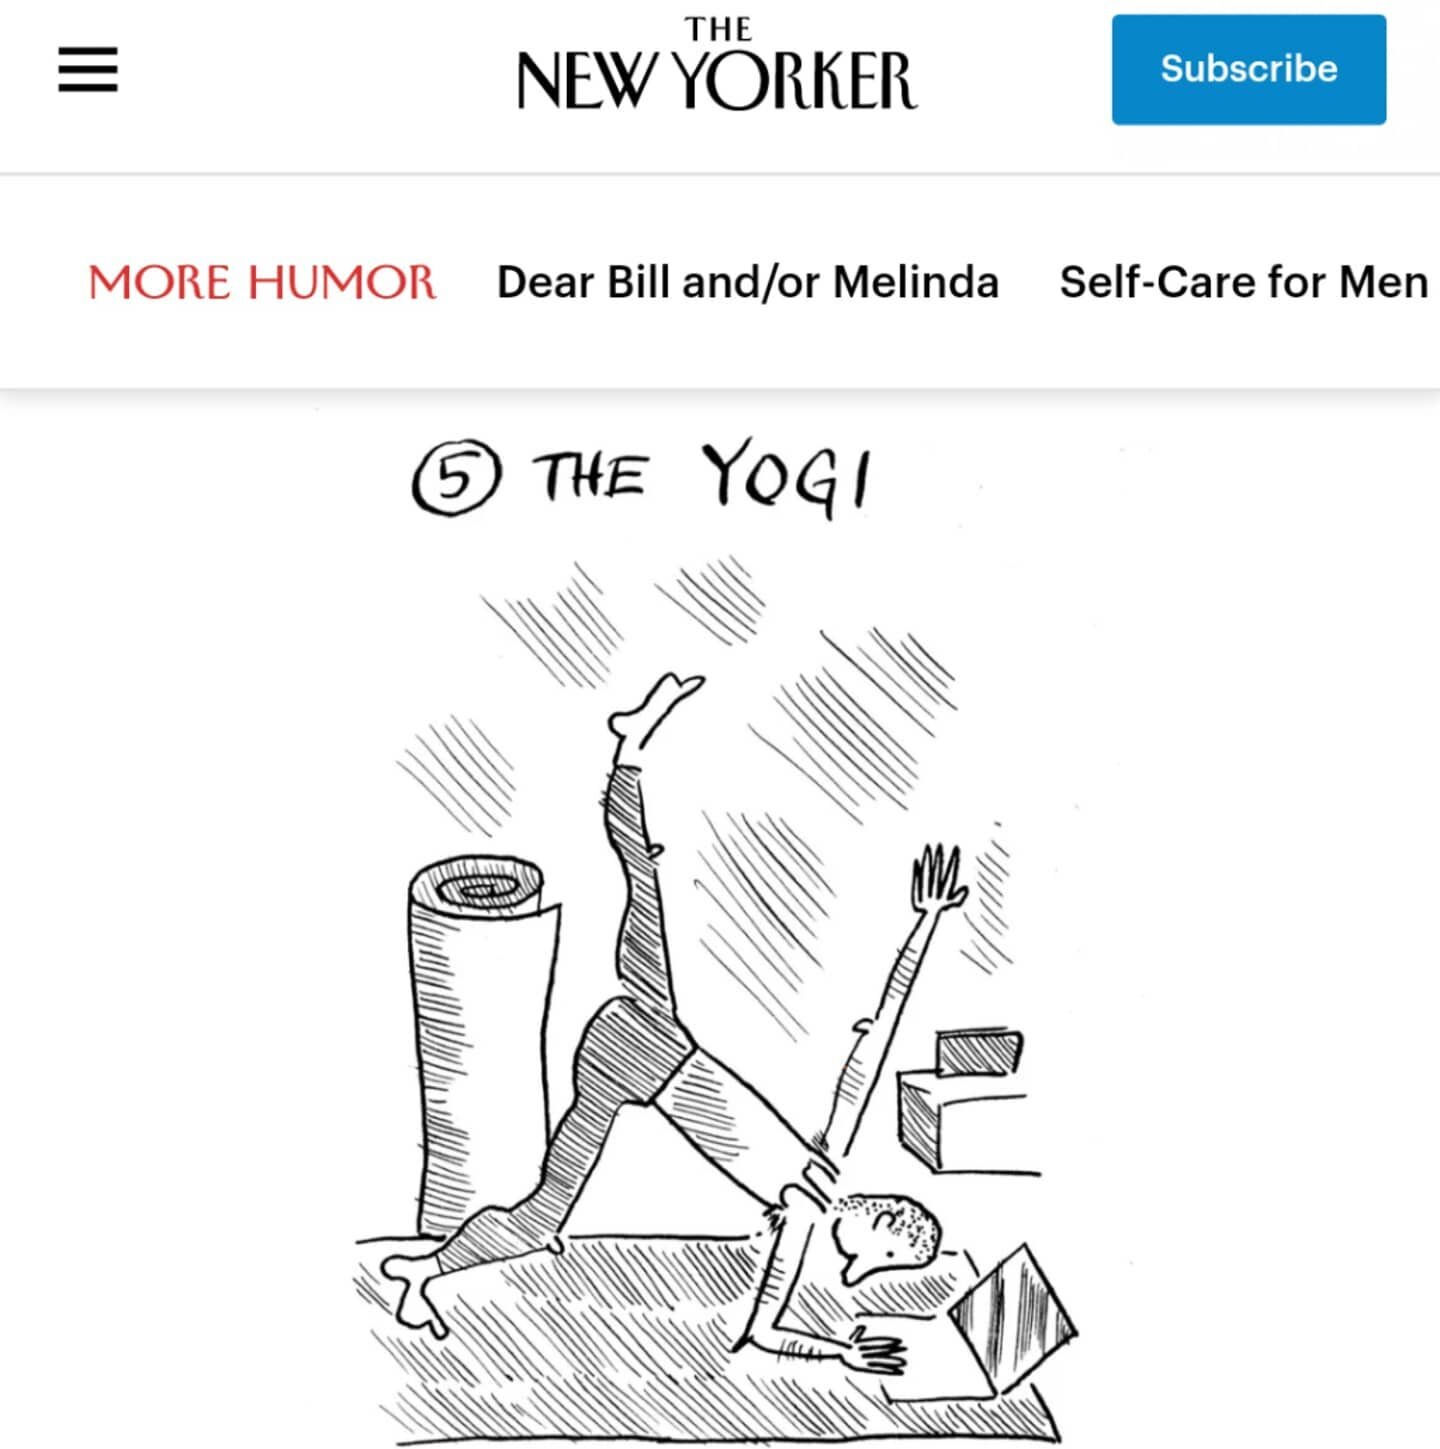 New Shouts piece in @newyorkermag today! Learn what the hottest new trends in ergonomics are&mdash;link in bio. Thanks @newyorkercartoons for publishing it. 
.
.
.
.
.
.
#newyorkercartoonist #newyorker #newyorkercartoons #cartoons #cartoonist #ergono